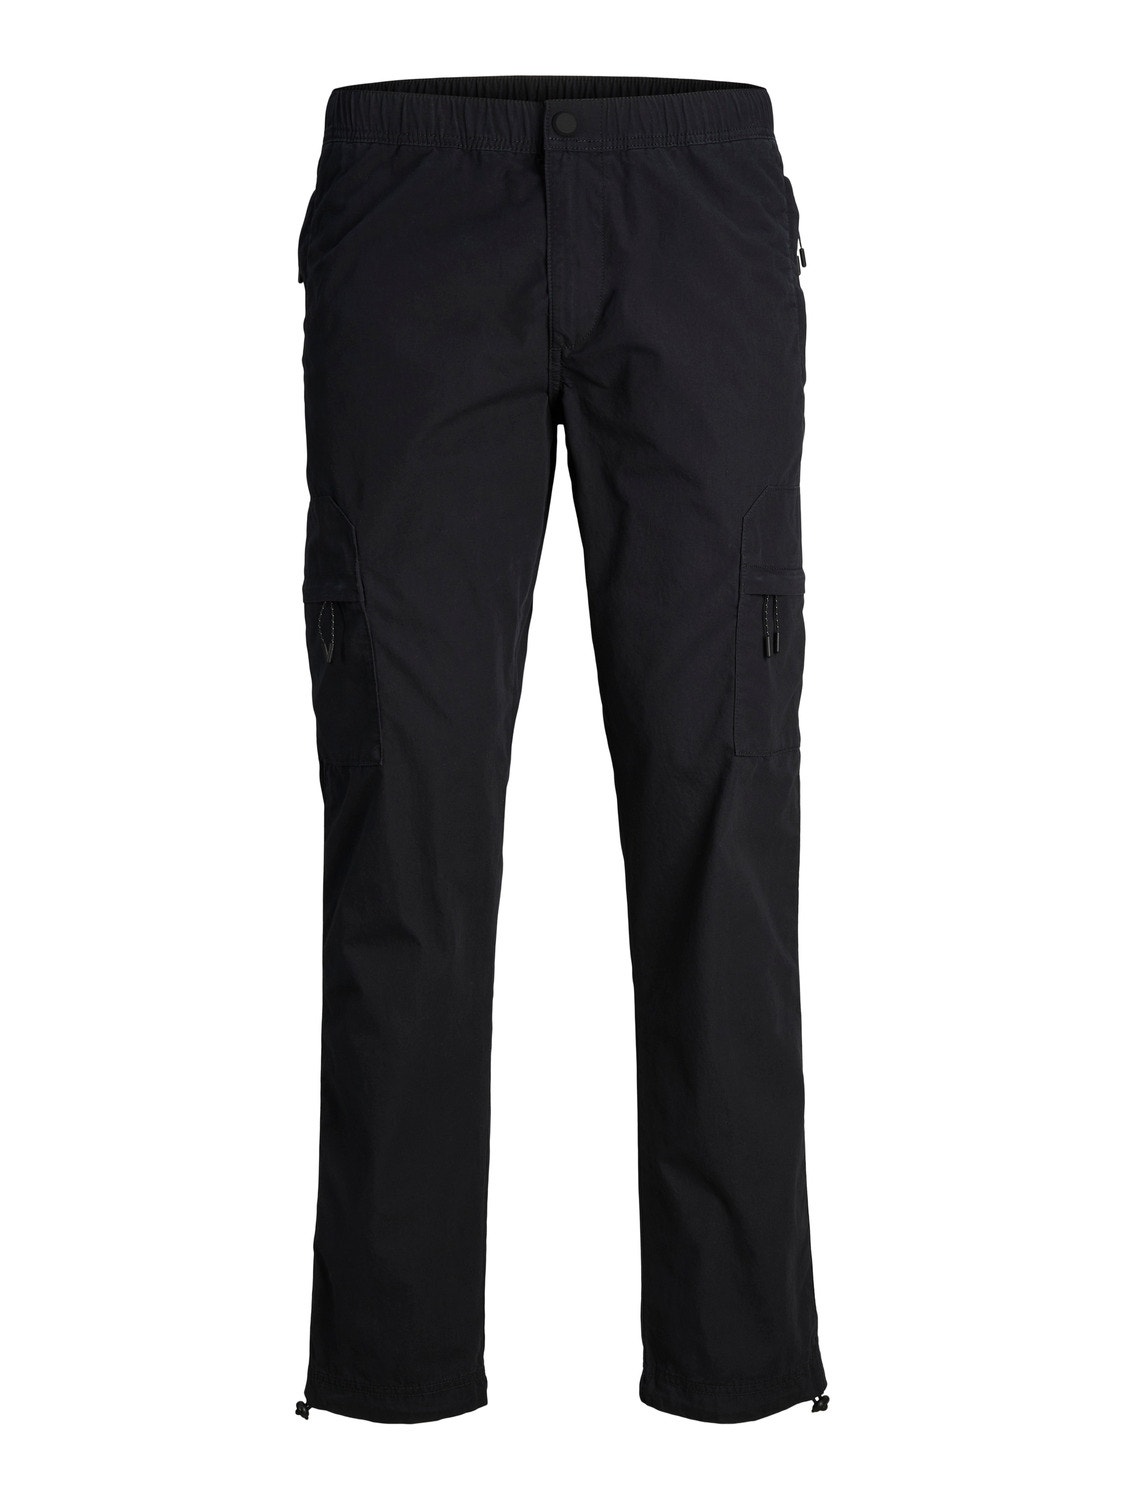 Jack & Jones Relaxed Fit Cargo trousers -Black - 12247360